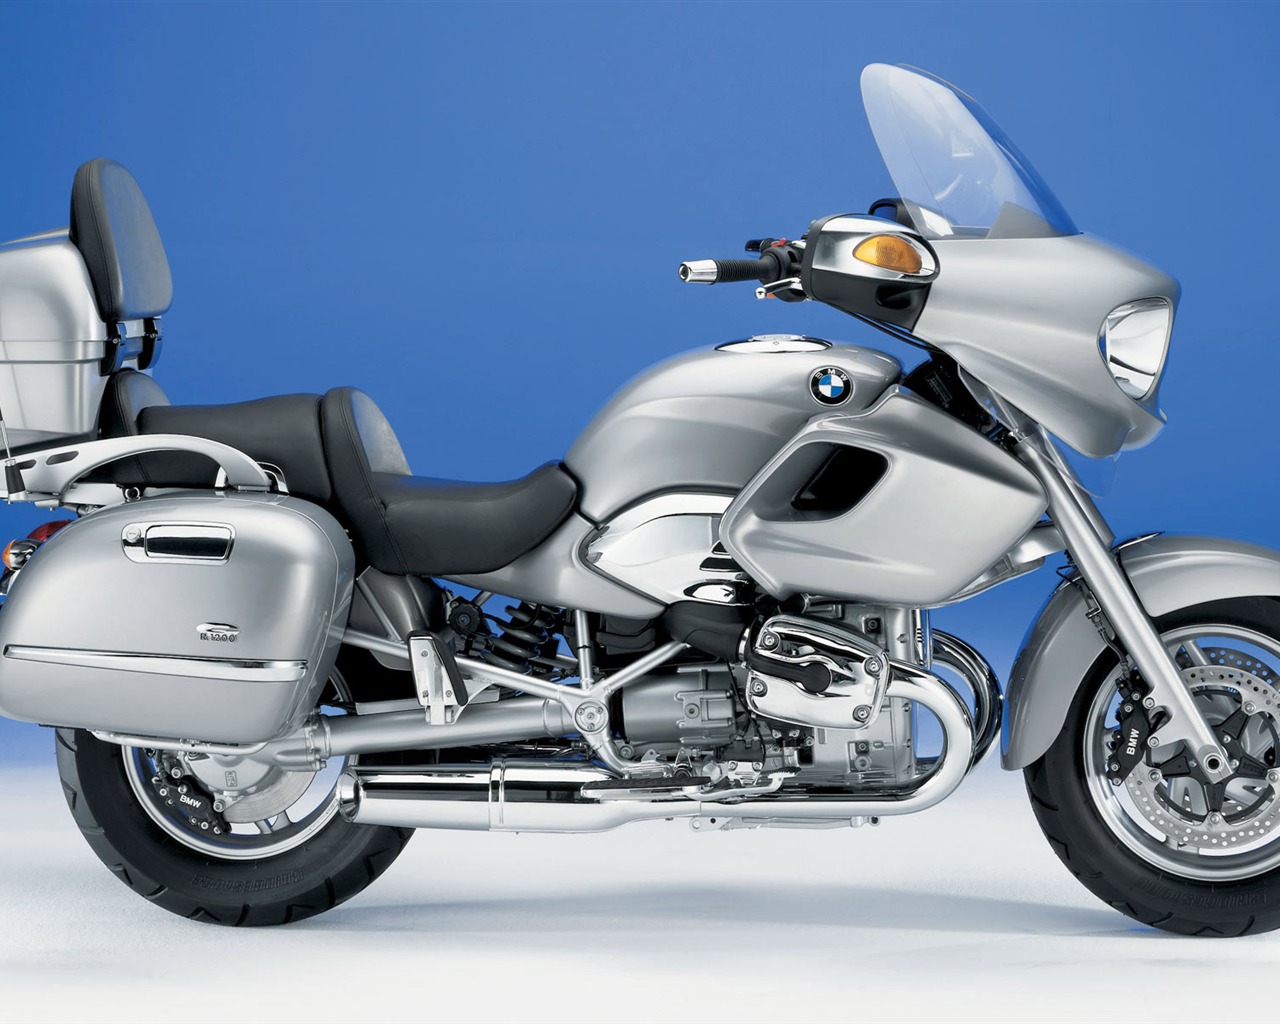 BMW motorcycle wallpapers (2) #20 - 1280x1024